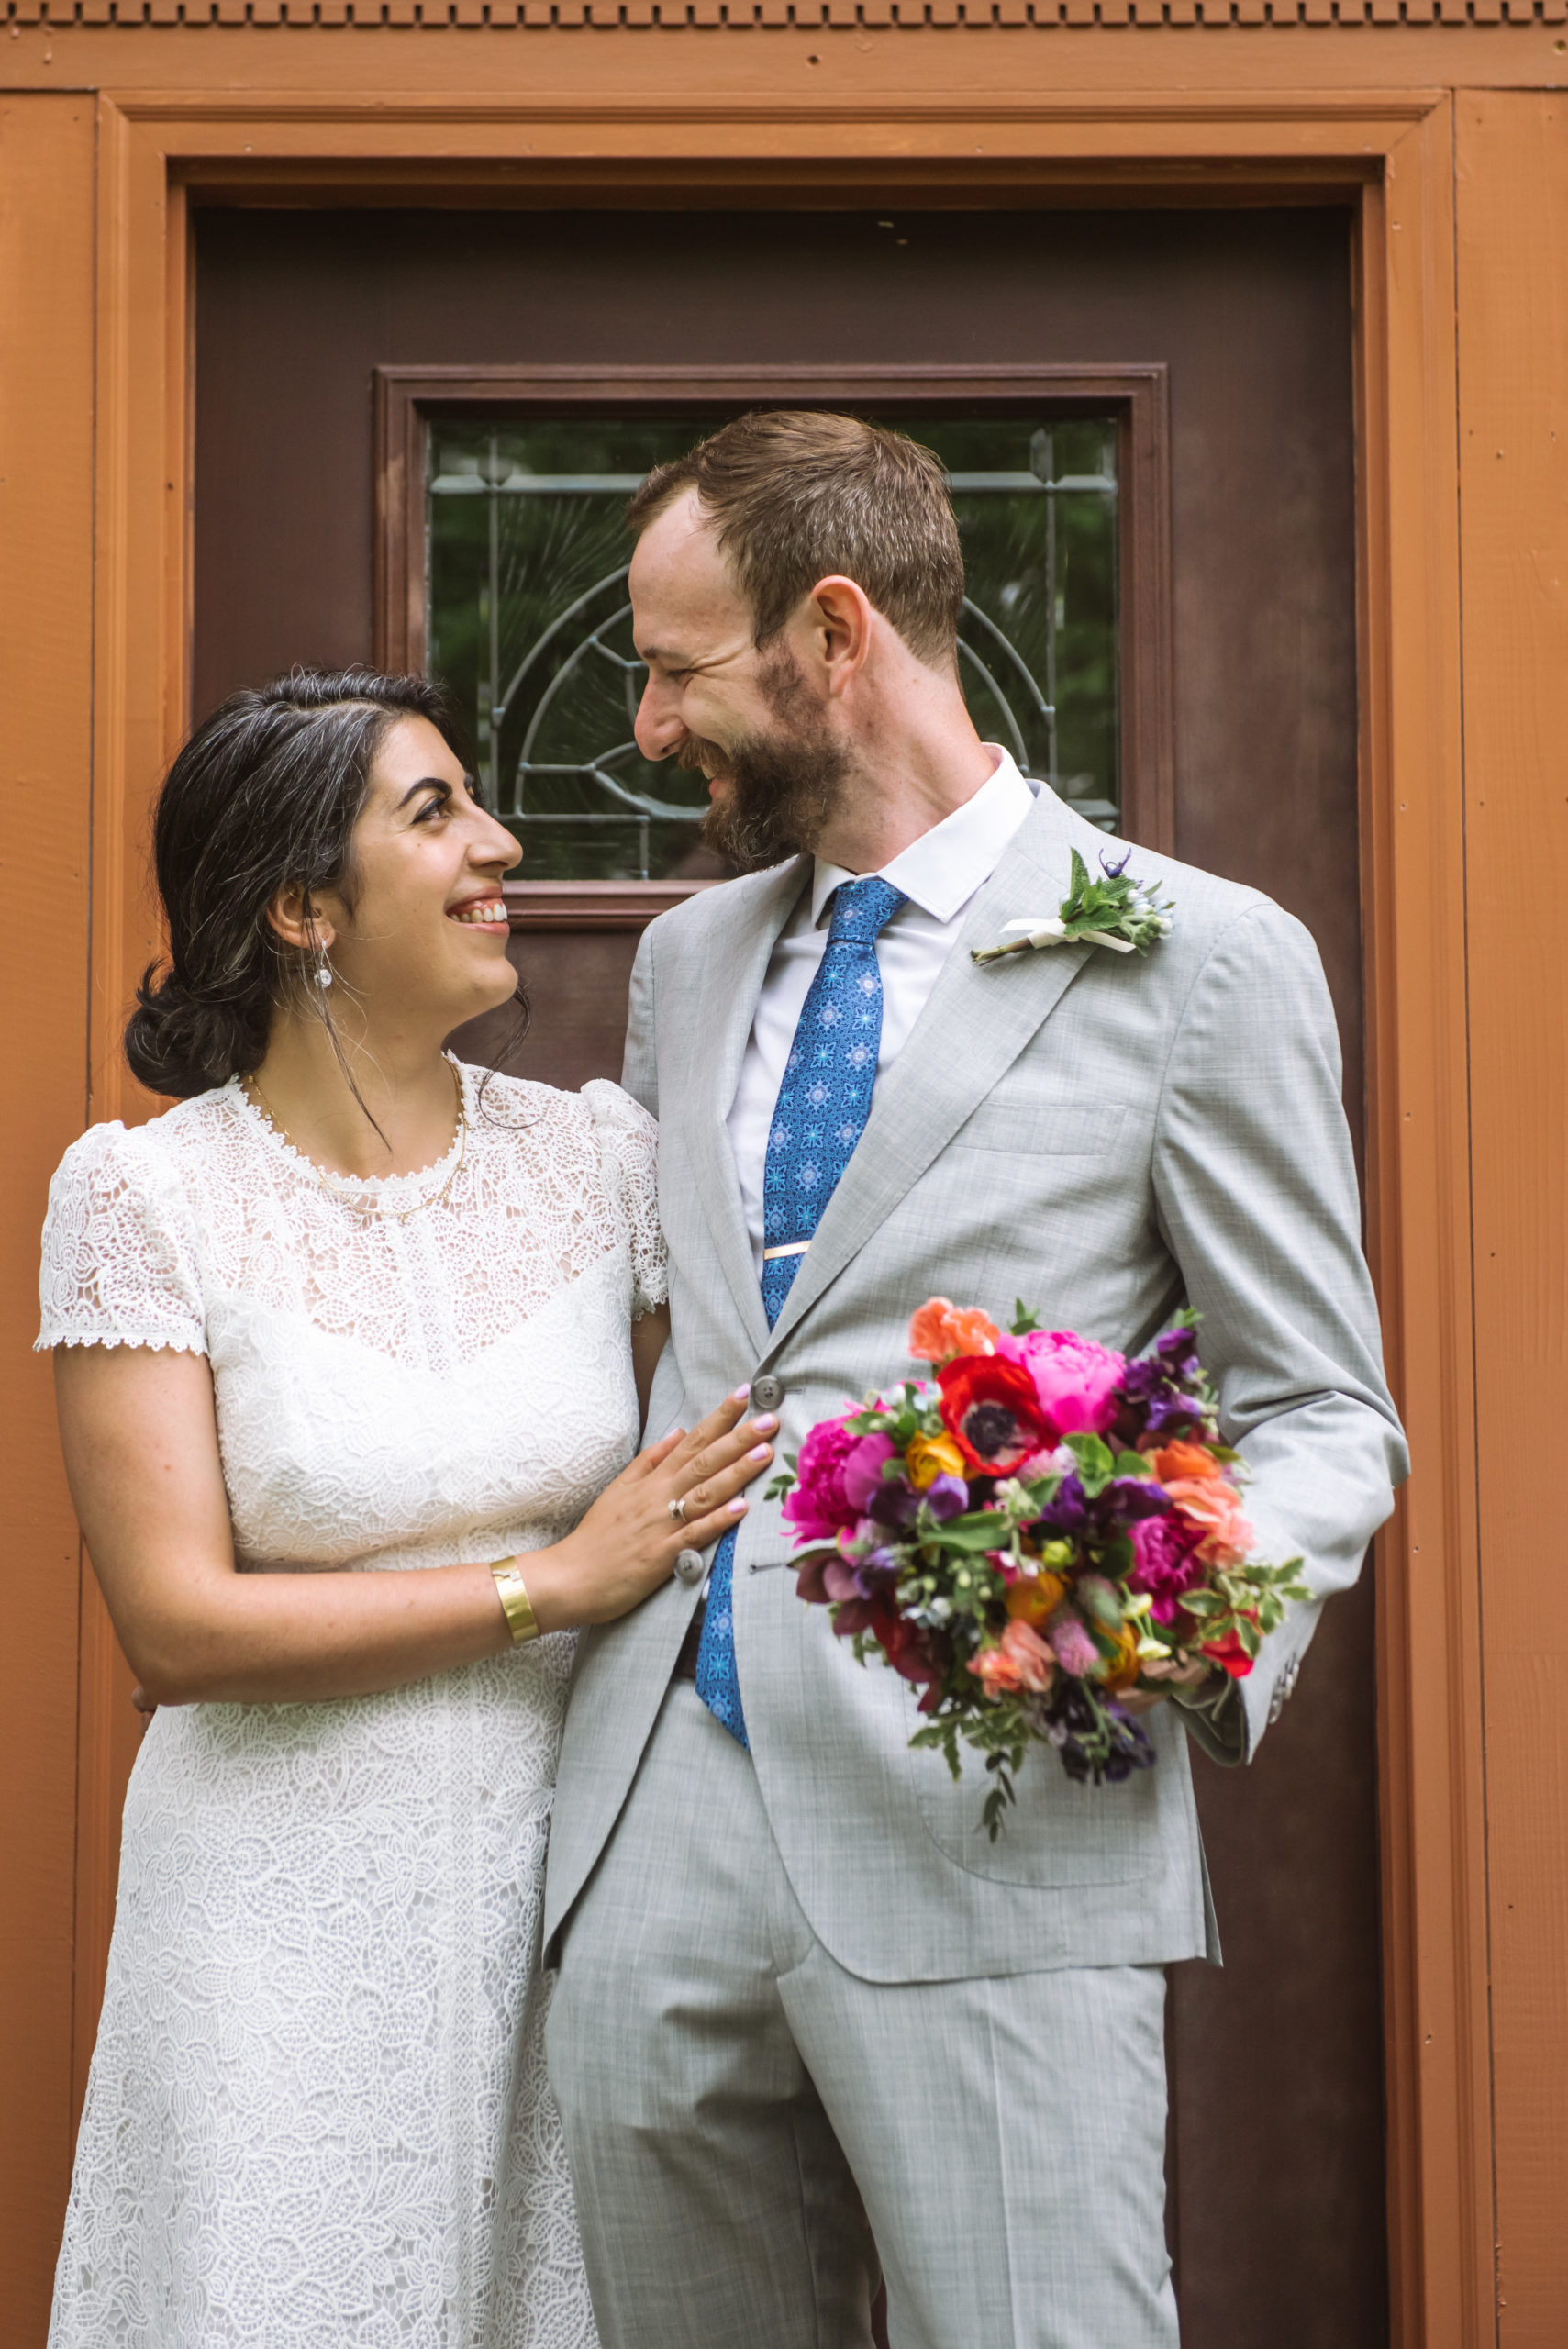 Bride and groom standing side by side, heads turned toward one another. They are both smiling. The bride is resting her right hand on her husband-to-be's waist. The groom is holding his wife-to-be's bouquet in his left hand. They are standing in front of a dark red wood house's front door with greenery and trees surrounding the facade.